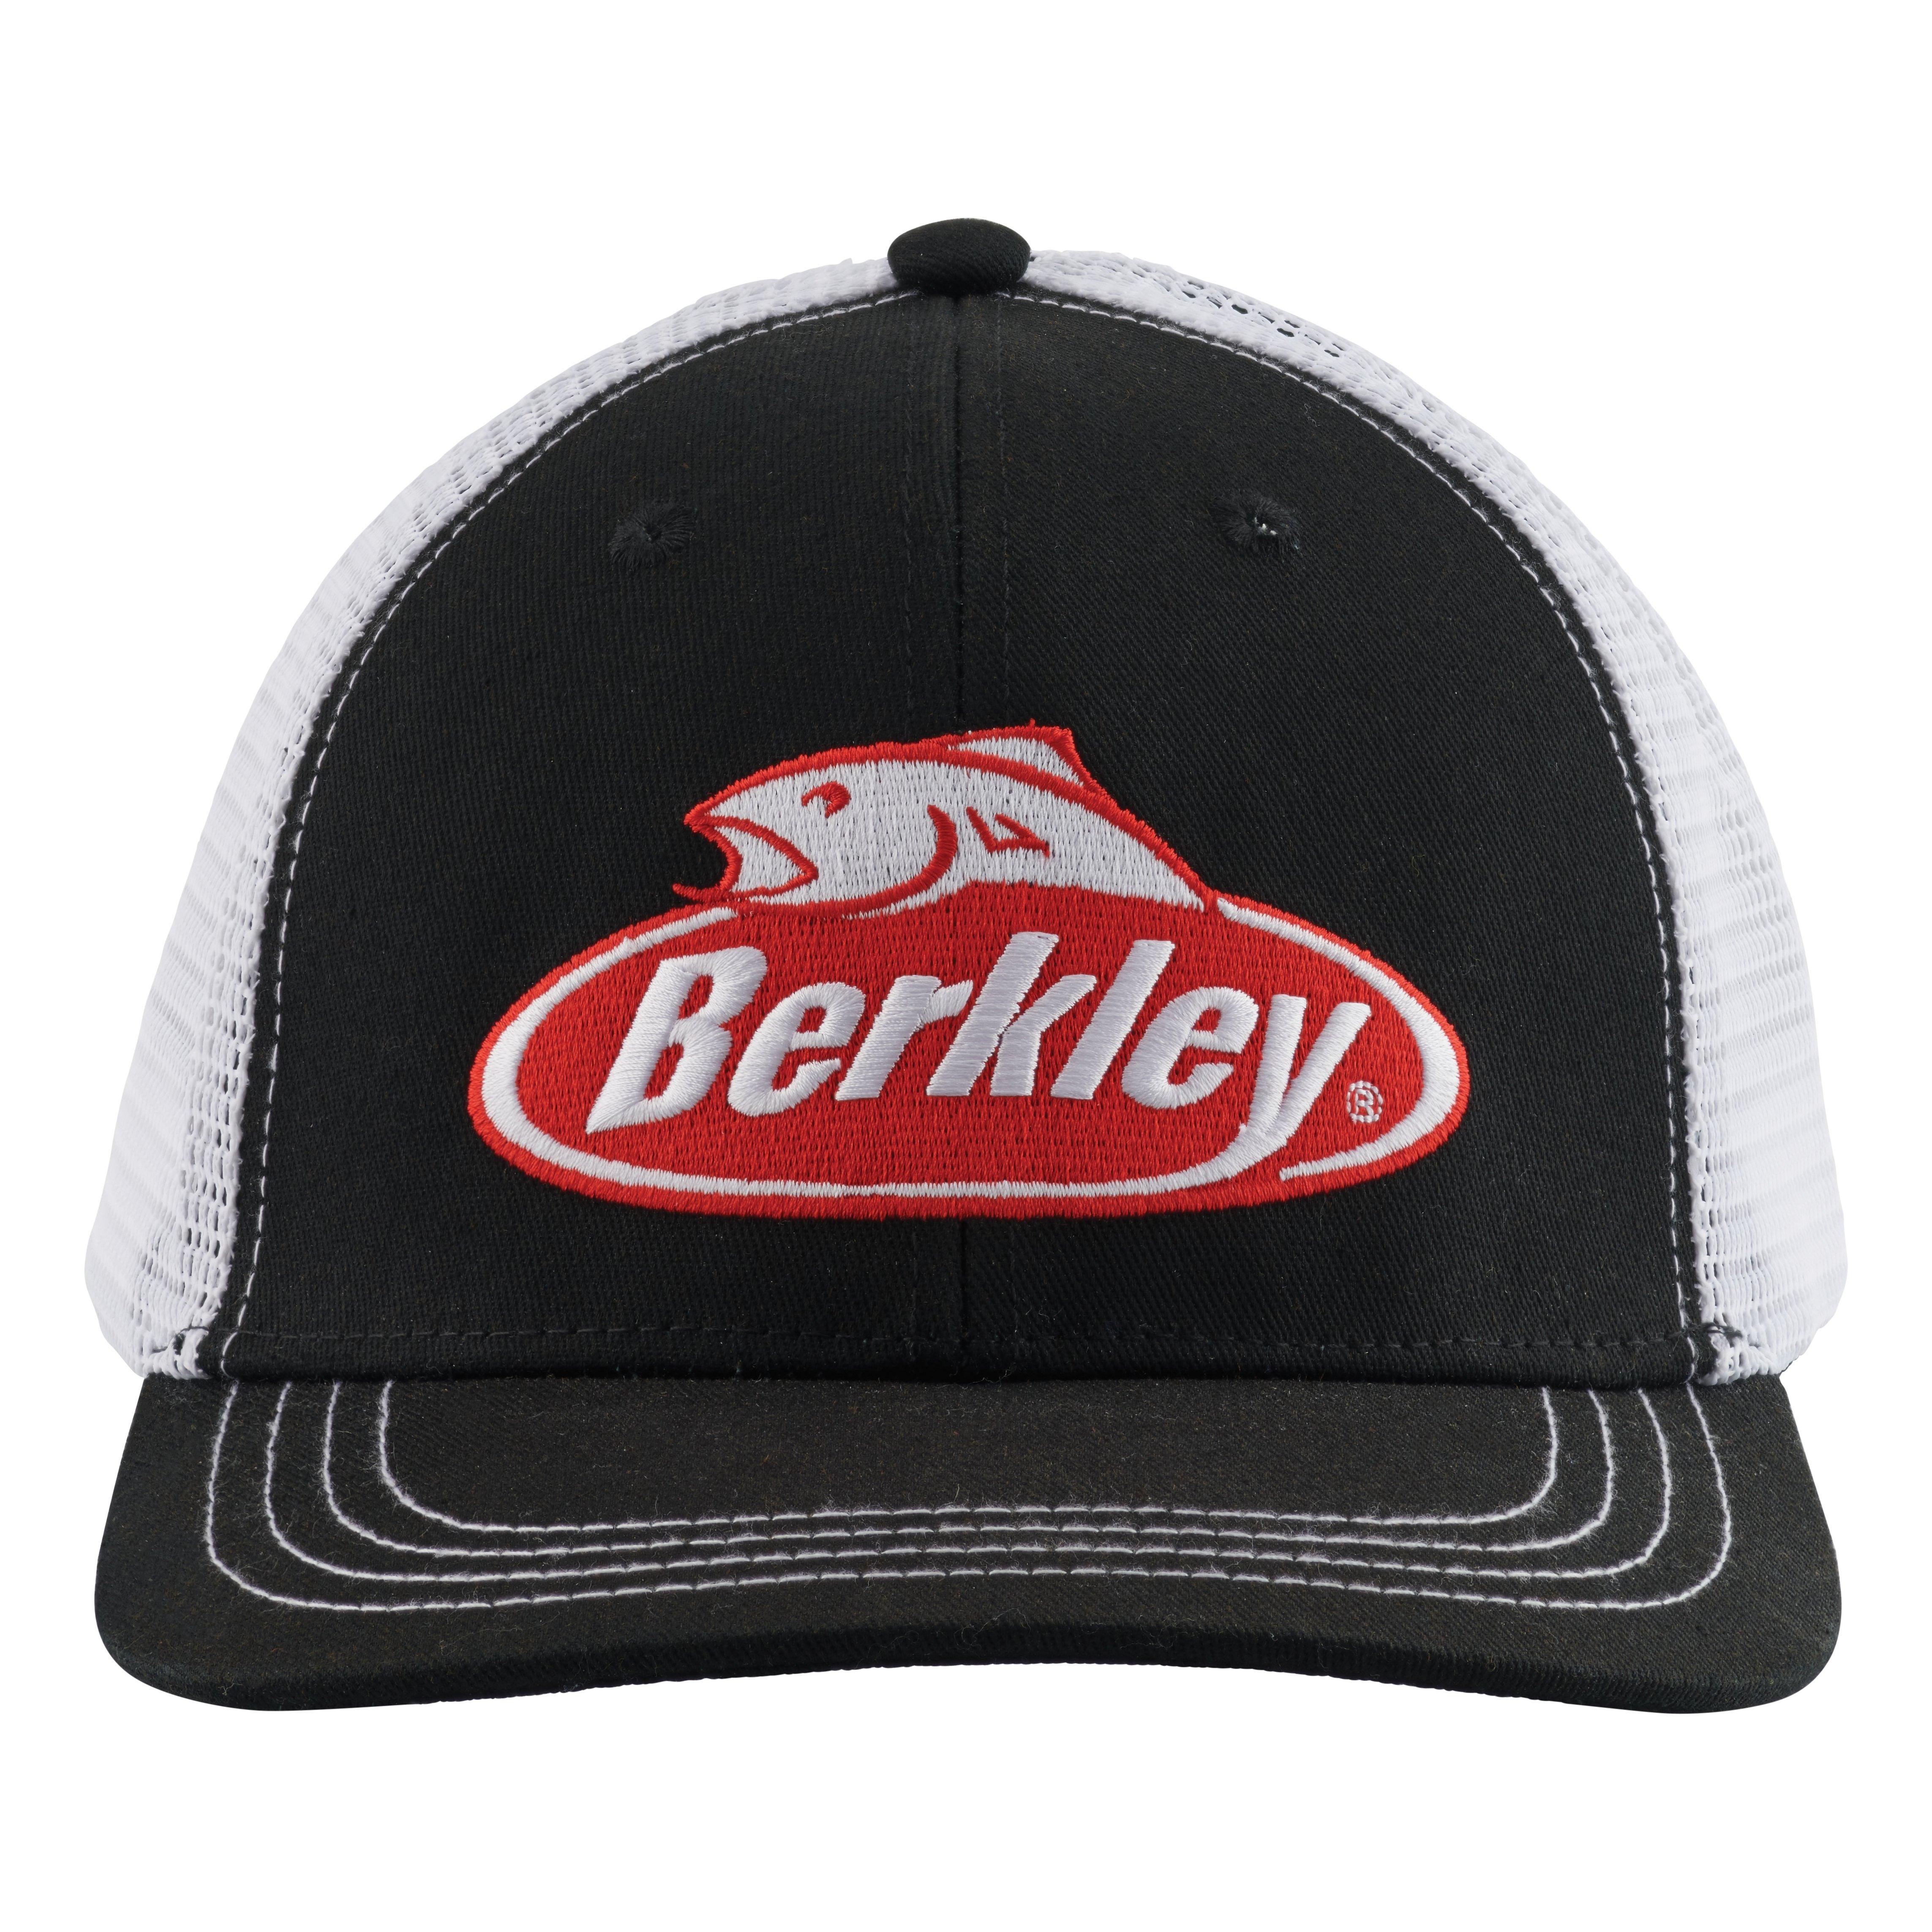 trucker hat with fish Cheap Sale - OFF 52%